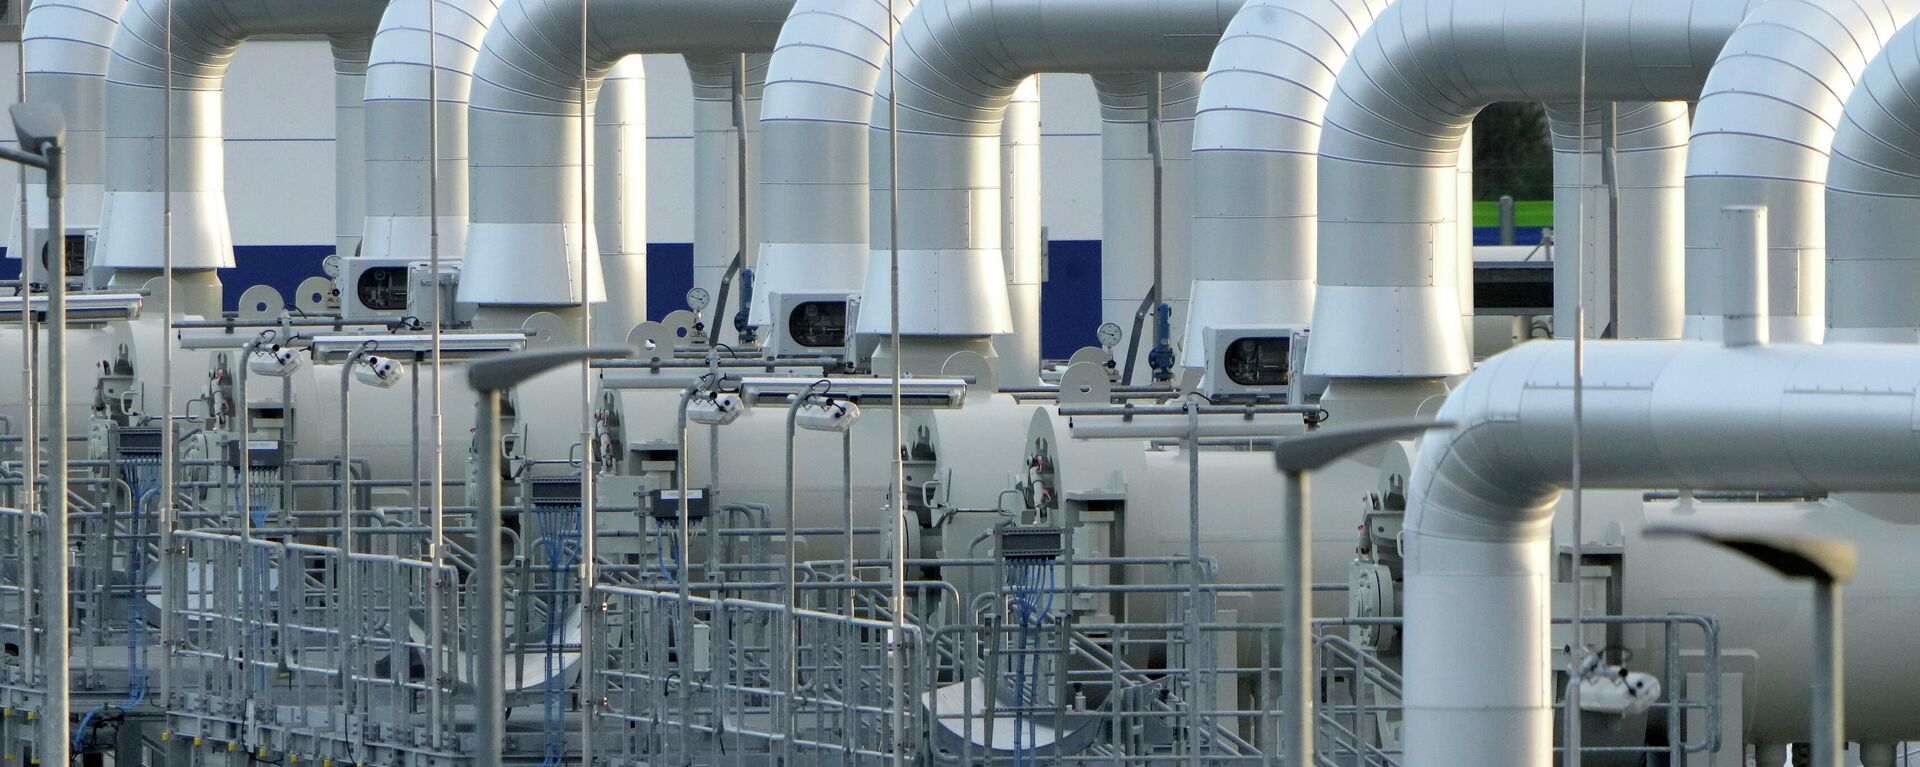 FILE - Pipes at the landfall facilities of the 'Nord Stream 2' gas pipline are pictured in Lubmin, northern Germany, Tuesday, Feb. 15, 2022 - Sputnik International, 1920, 13.07.2022